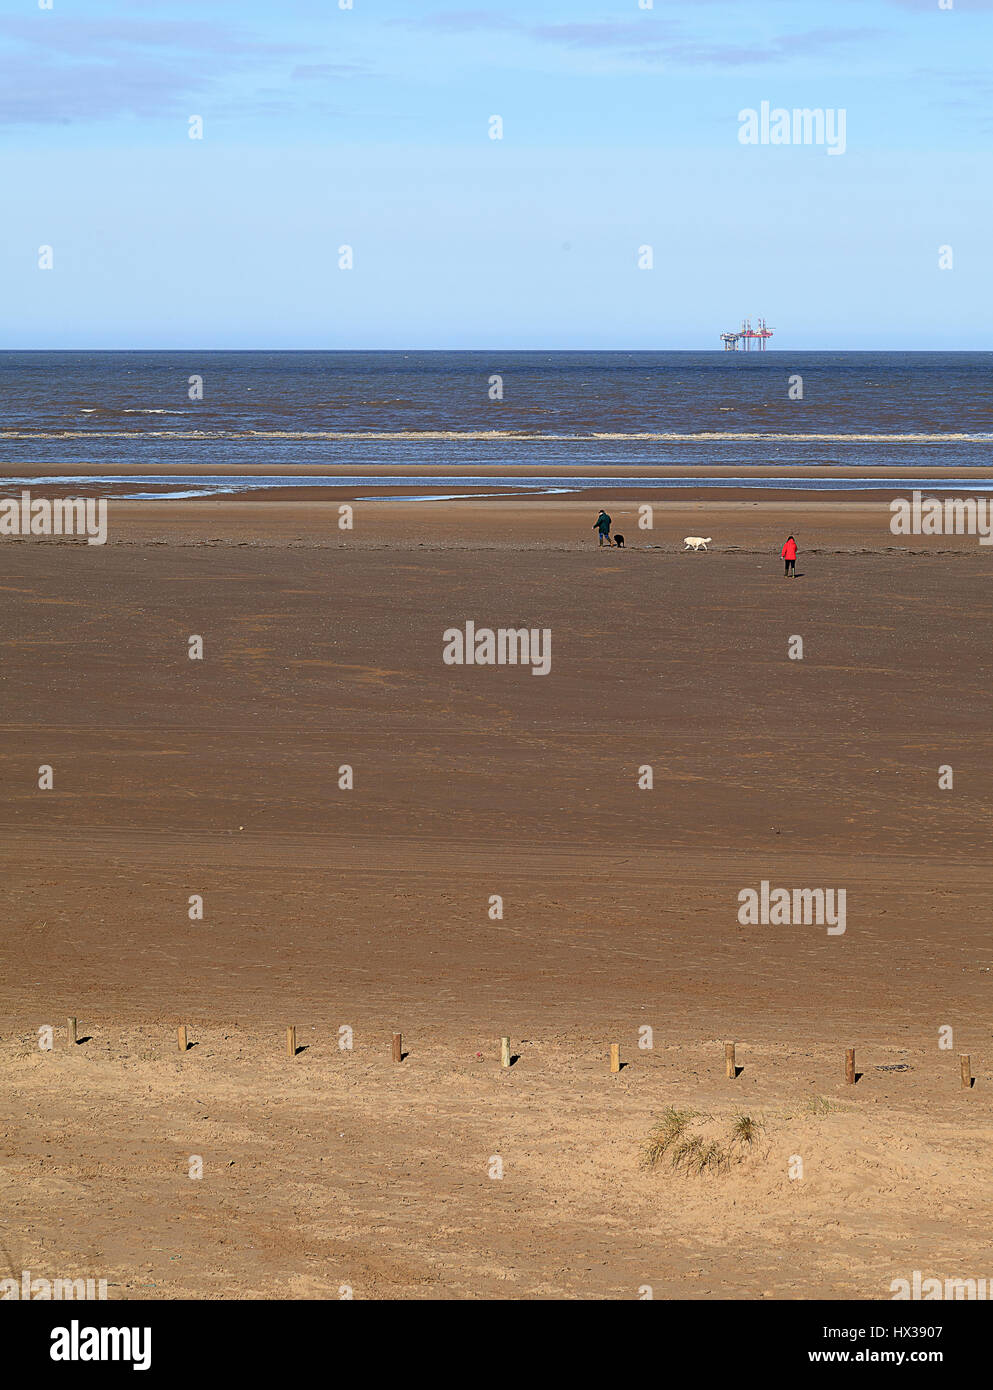 Beach Image between Ainsdale and Formby England Stock Photo